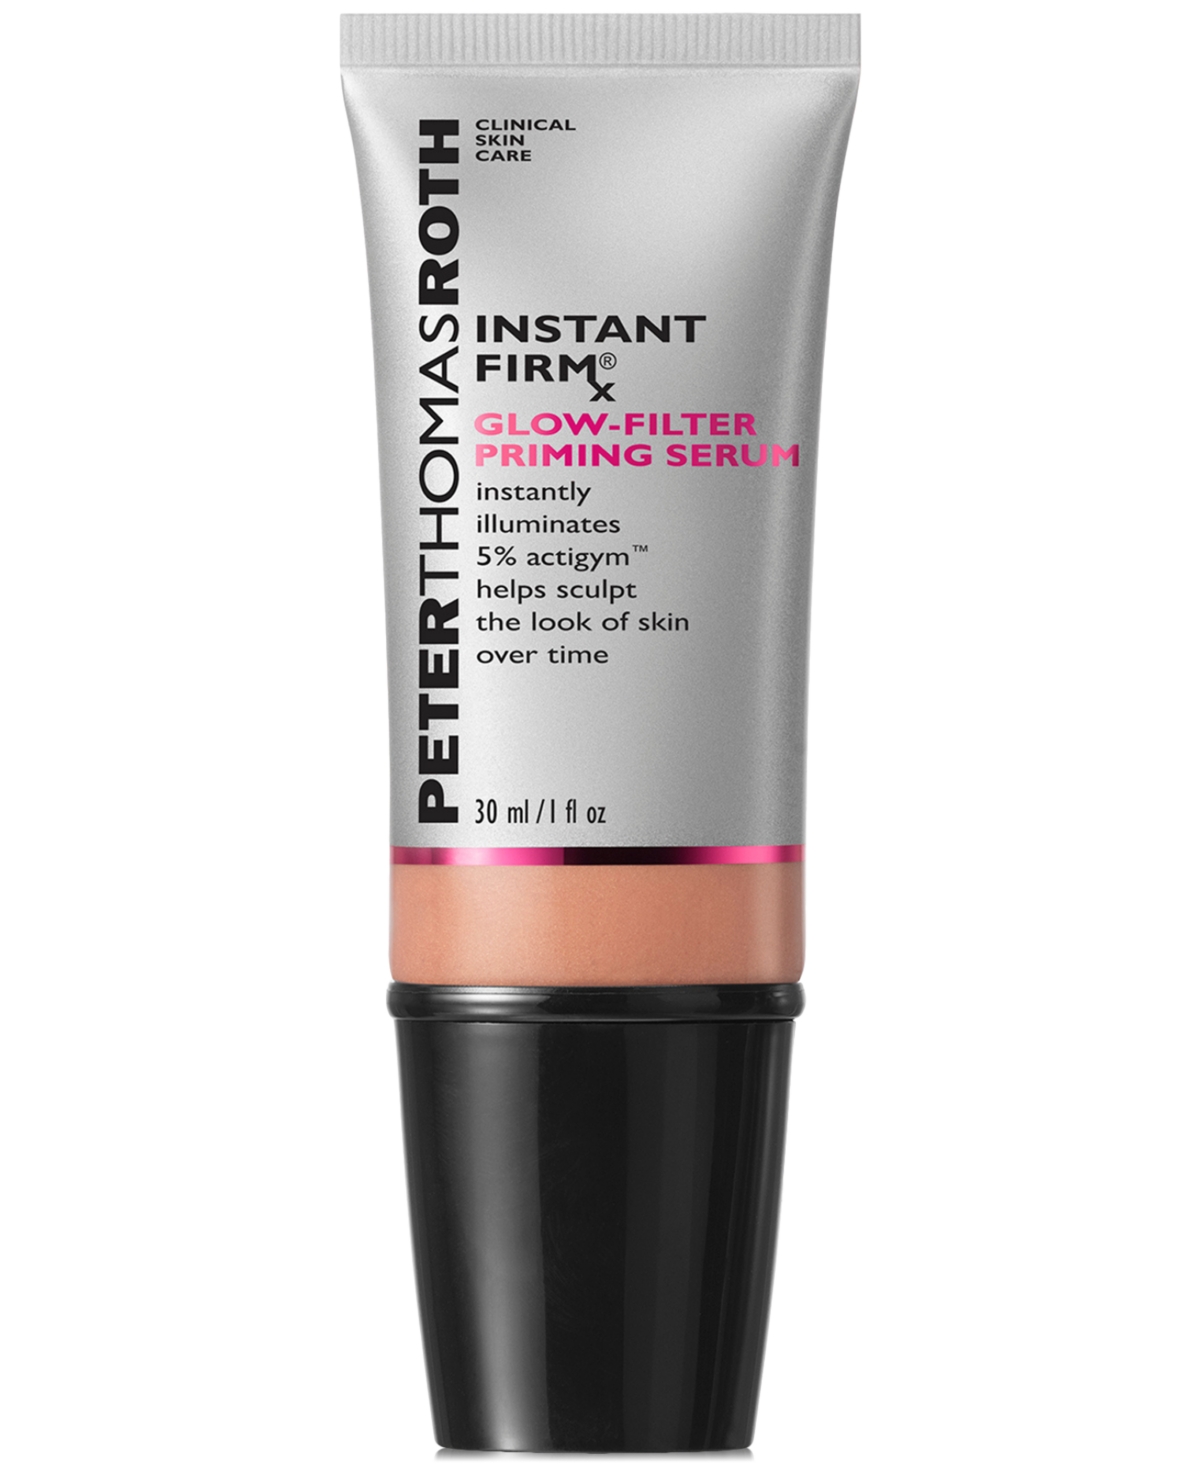 Peter Thomas Roth Instant Firmx Glow-filter Priming Serum, 1 Oz. In White